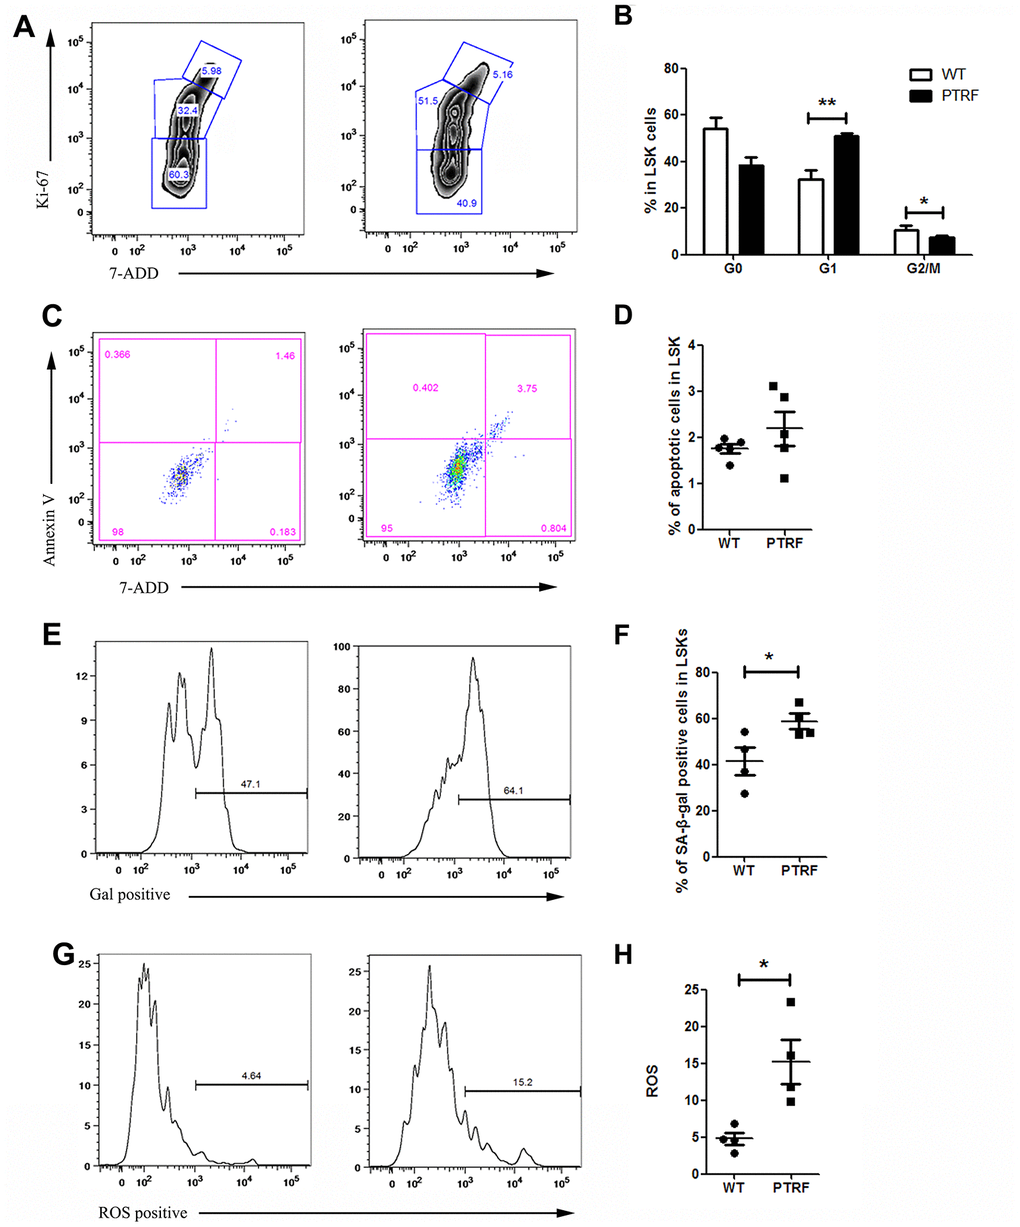 PTRF overexpression induced cell cycle arrest at G1 phase and accelerated cellular senescence. (A) Flow cytometry plots showing cell cycle distribution of LSKs from PTRF and WT mice. (B) The percentage of cells in each phase of the cell cycle. (C) Flow cytometry plots showing viable and apoptotic LSKs from PTRF and WT mice. (D) The percentage of apoptotic LSK cells. (E) Flow cytometry plots showing C12FDG levels in the LSKs from PTRF and WT mice. (F) The percentage of SA-β-gal-positive LSK cells. n=4 or 5 mice per group. (G) Flow cytometry plots showing ROS producing cells stained with the DCFH probe. (H) The percentage of ROS-positive LSK cells. Data represent the mean ± SD. *, P P 